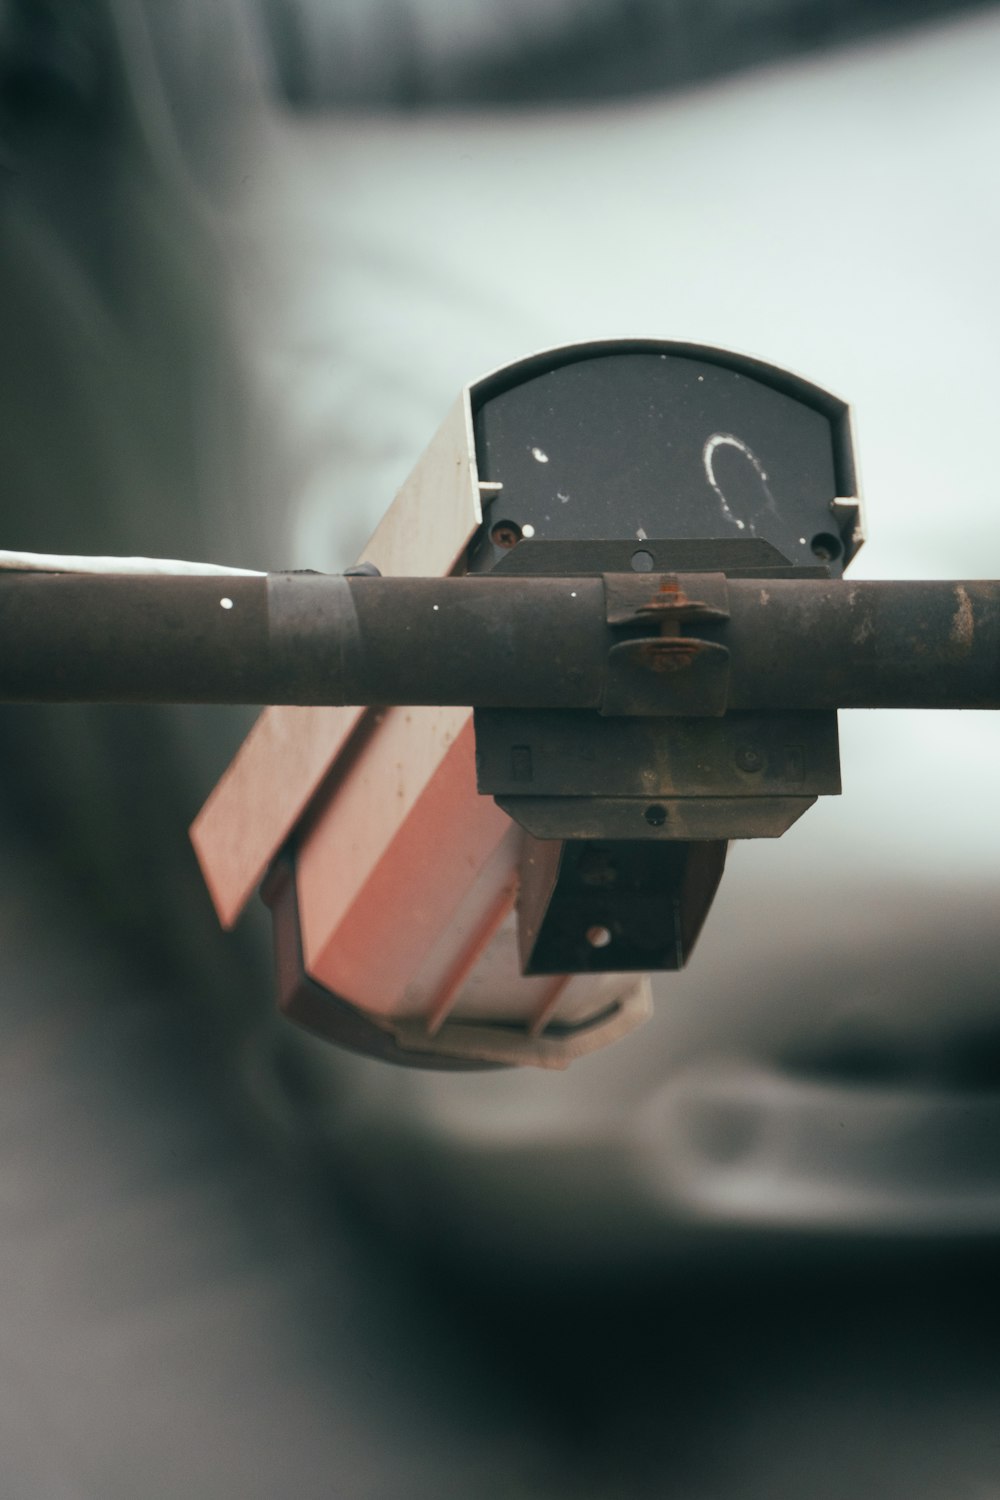 a close up of a parking meter with a car in the background